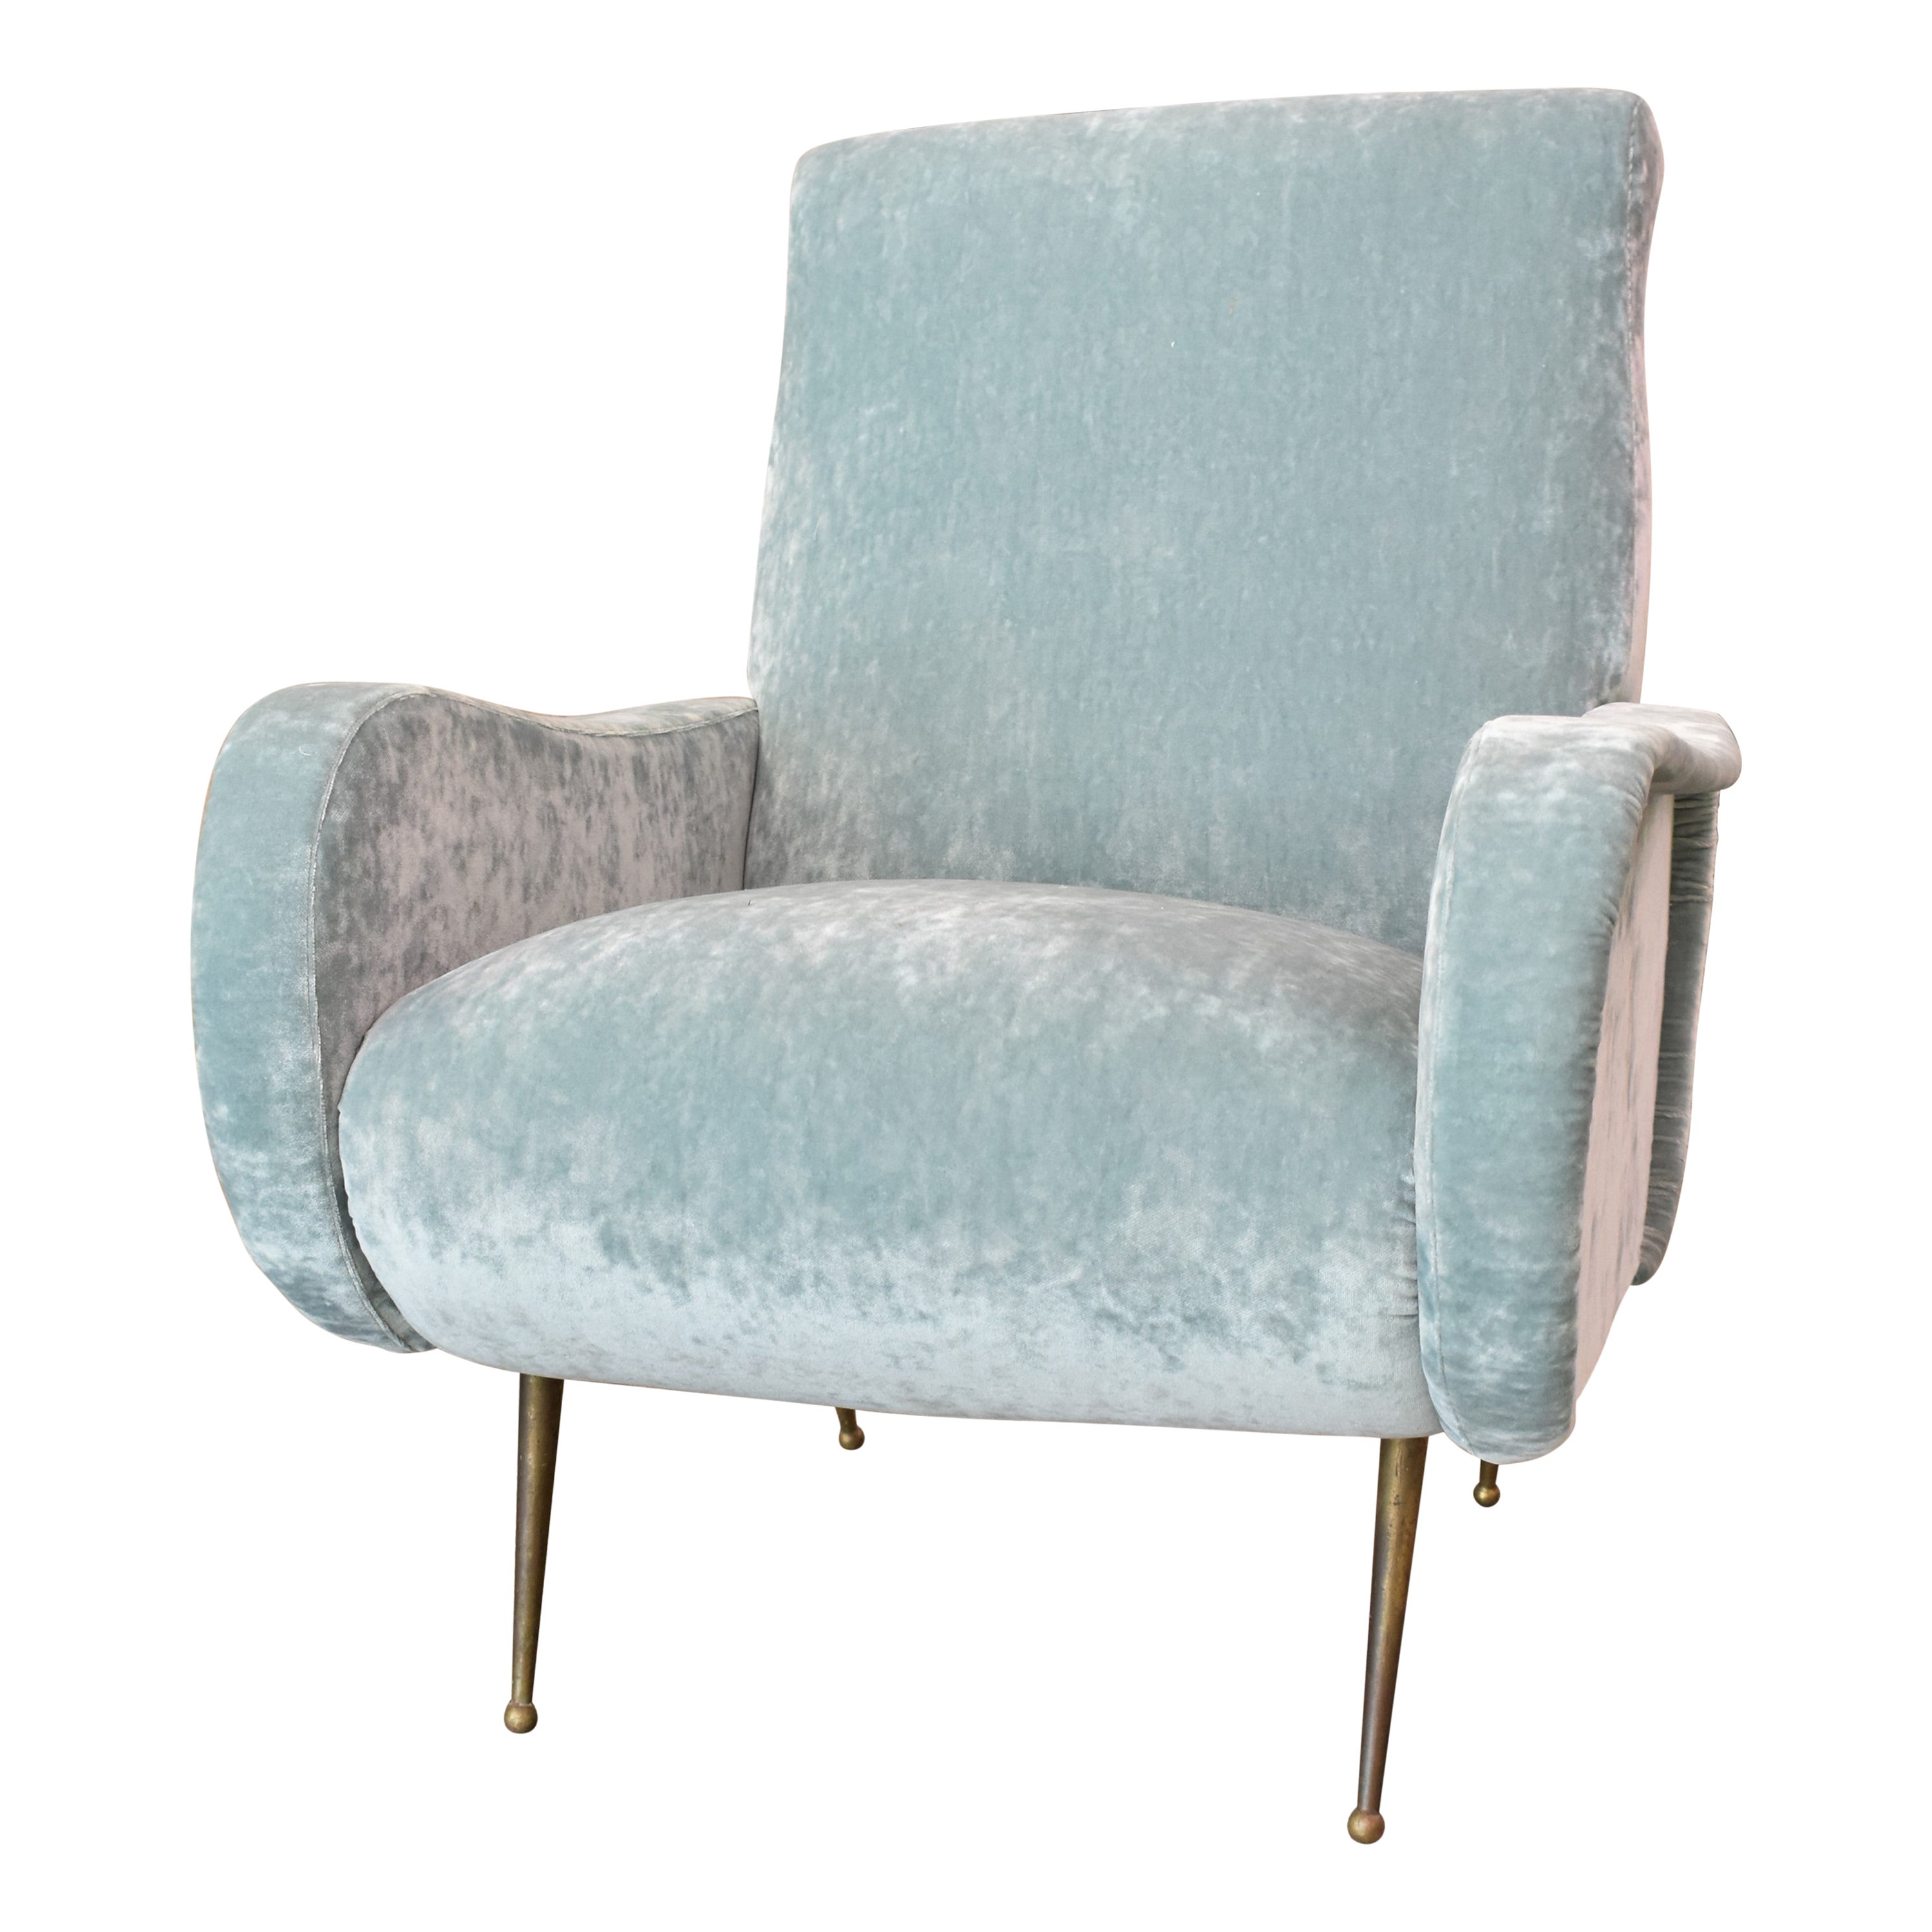 Vintage armchair dating back to the 1960s, Italian manufacture.
The armchair has new padding and upholstery in light blue velvet.
The leg is made of brass.
The total height is 90cm, while the seat height is 43cm.
Depth: 67cm
Length: 73cm
Very